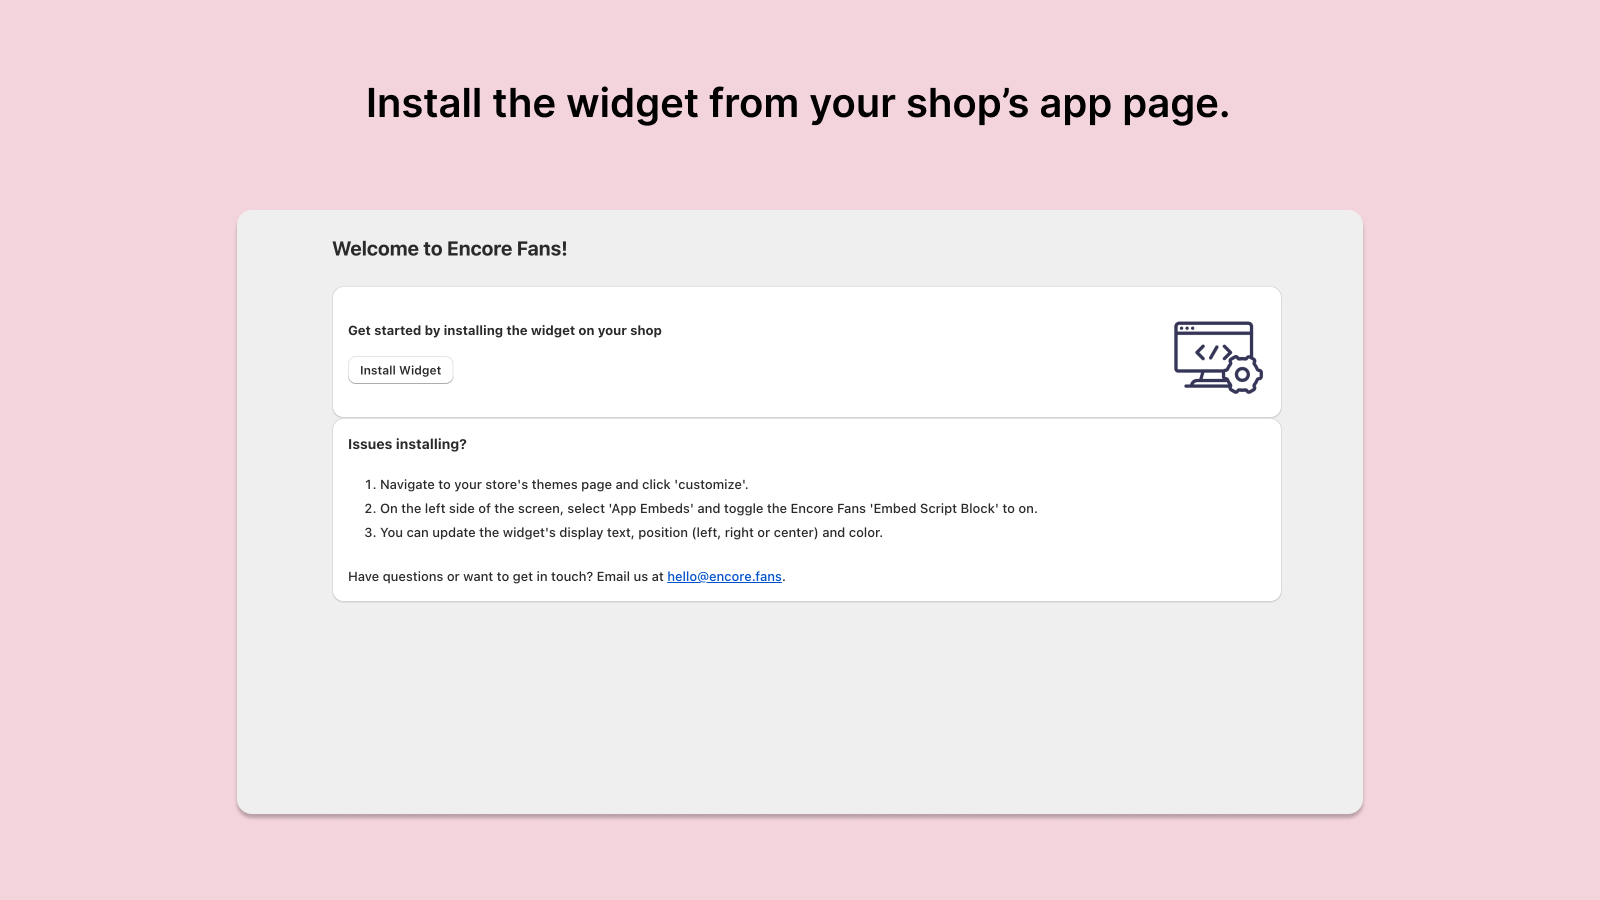 Install the widget from your Shopify page